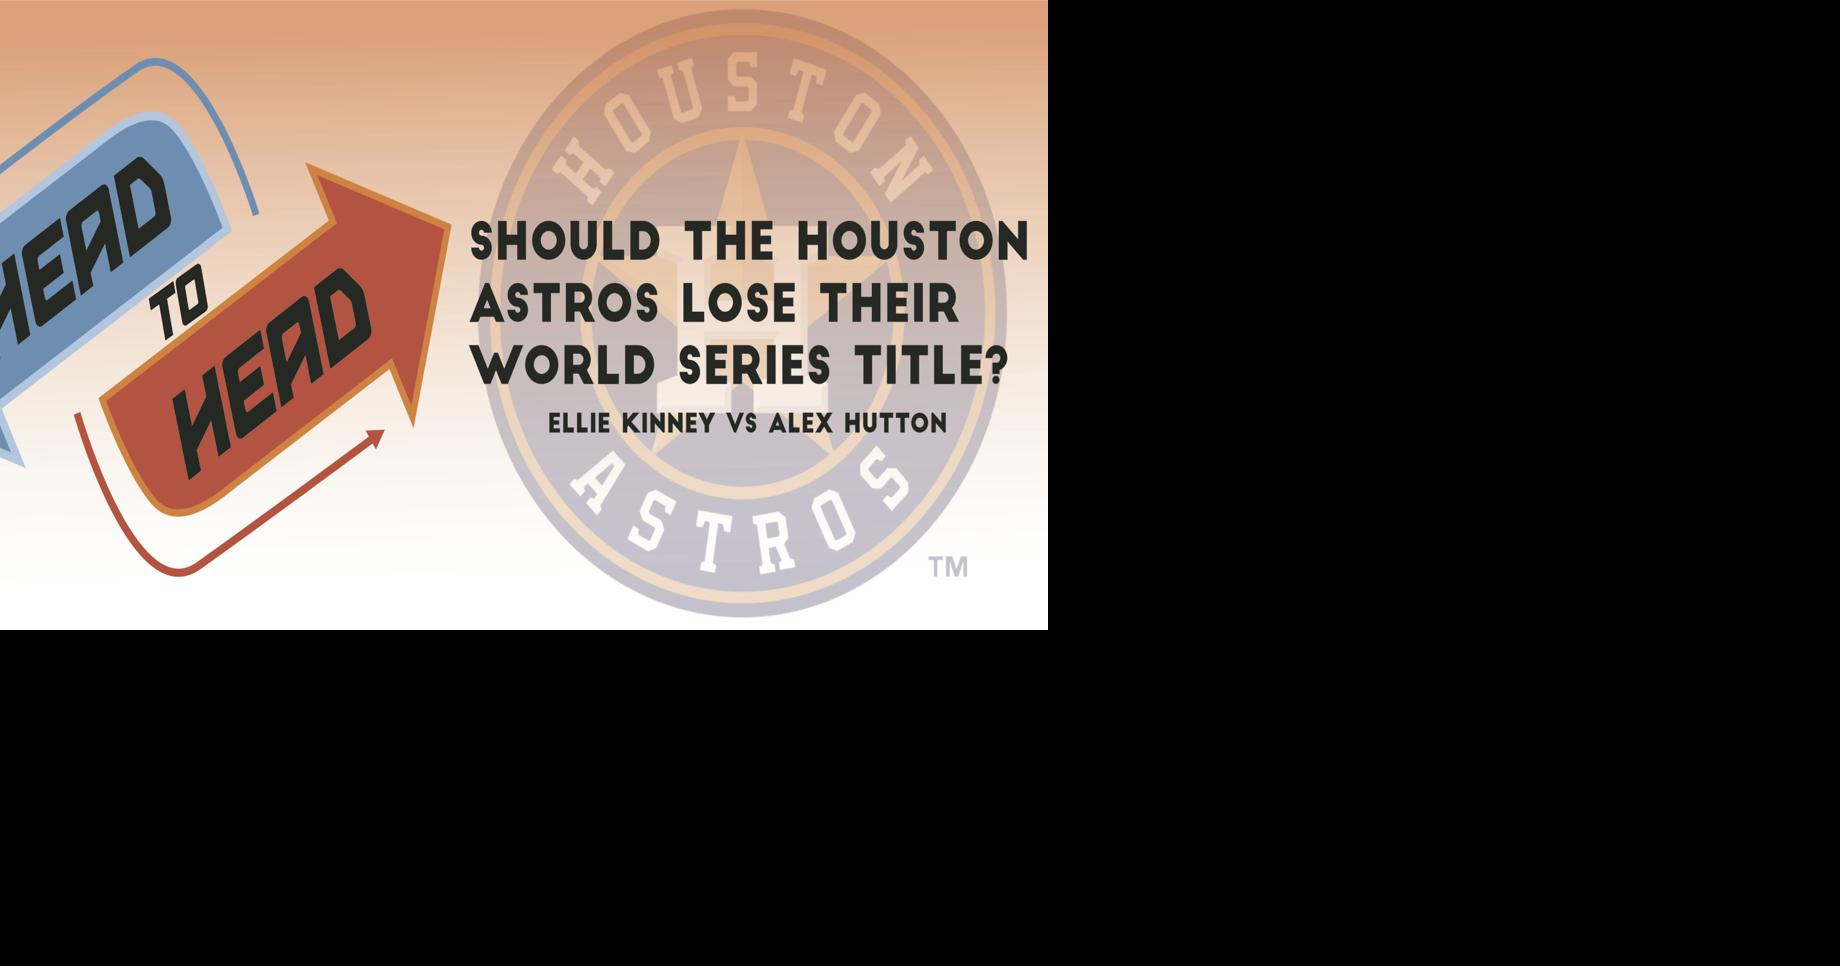 Should the Astros lose their World Series title?